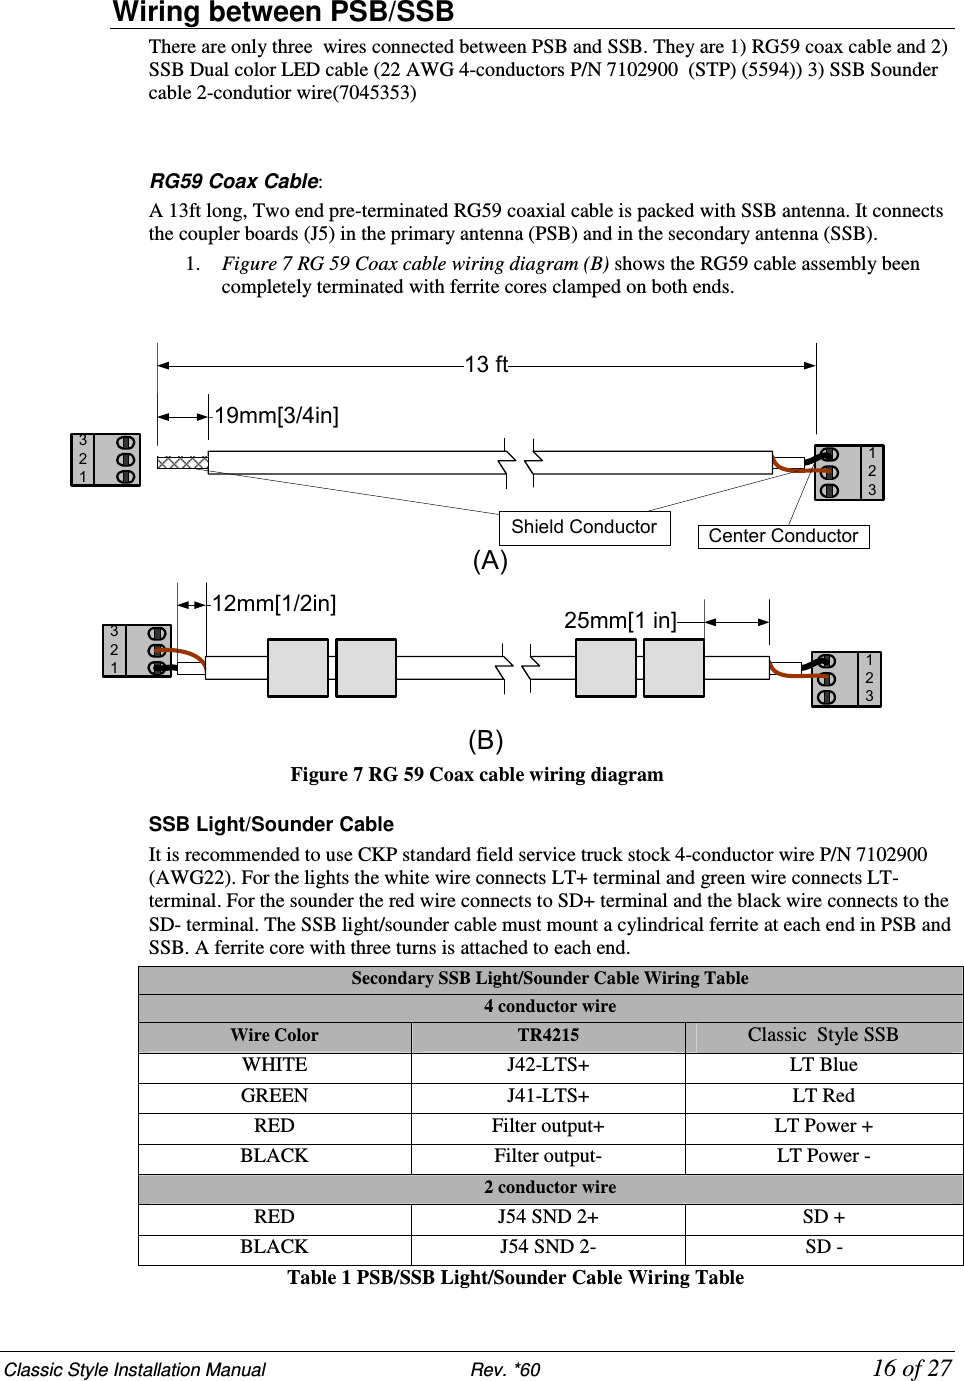 Classic Style Installation Manual                           Rev. *60           16 of 27 Wiring between PSB/SSB There are only three  wires connected between PSB and SSB. They are 1) RG59 coax cable and 2) SSB Dual color LED cable (22 AWG 4-conductors P/N 7102900  (STP) (5594)) 3) SSB Sounder cable 2-condutior wire(7045353)   RG59 Coax Cable:  A 13ft long, Two end pre-terminated RG59 coaxial cable is packed with SSB antenna. It connects the coupler boards (J5) in the primary antenna (PSB) and in the secondary antenna (SSB).  1. Figure 7 RG 59 Coax cable wiring diagram (B) shows the RG59 cable assembly been completely terminated with ferrite cores clamped on both ends.  12312332113 ft19mm[3/4in]25mm[1 in]12mm[1/2in](A)(B)Center ConductorShield Conductor321 Figure 7 RG 59 Coax cable wiring diagram  SSB Light/Sounder Cable It is recommended to use CKP standard field service truck stock 4-conductor wire P/N 7102900 (AWG22). For the lights the white wire connects LT+ terminal and green wire connects LT- terminal. For the sounder the red wire connects to SD+ terminal and the black wire connects to the SD- terminal. The SSB light/sounder cable must mount a cylindrical ferrite at each end in PSB and SSB. A ferrite core with three turns is attached to each end. Secondary SSB Light/Sounder Cable Wiring Table 4 conductor wire Wire Color  TR4215 Classic  Style SSB  WHITE  J42-LTS+  LT Blue GREEN  J41-LTS+  LT Red RED  Filter output+  LT Power + BLACK  Filter output-  LT Power - 2 conductor wire RED  J54 SND 2+  SD + BLACK  J54 SND 2-  SD -                                                         Table 1 PSB/SSB Light/Sounder Cable Wiring Table 